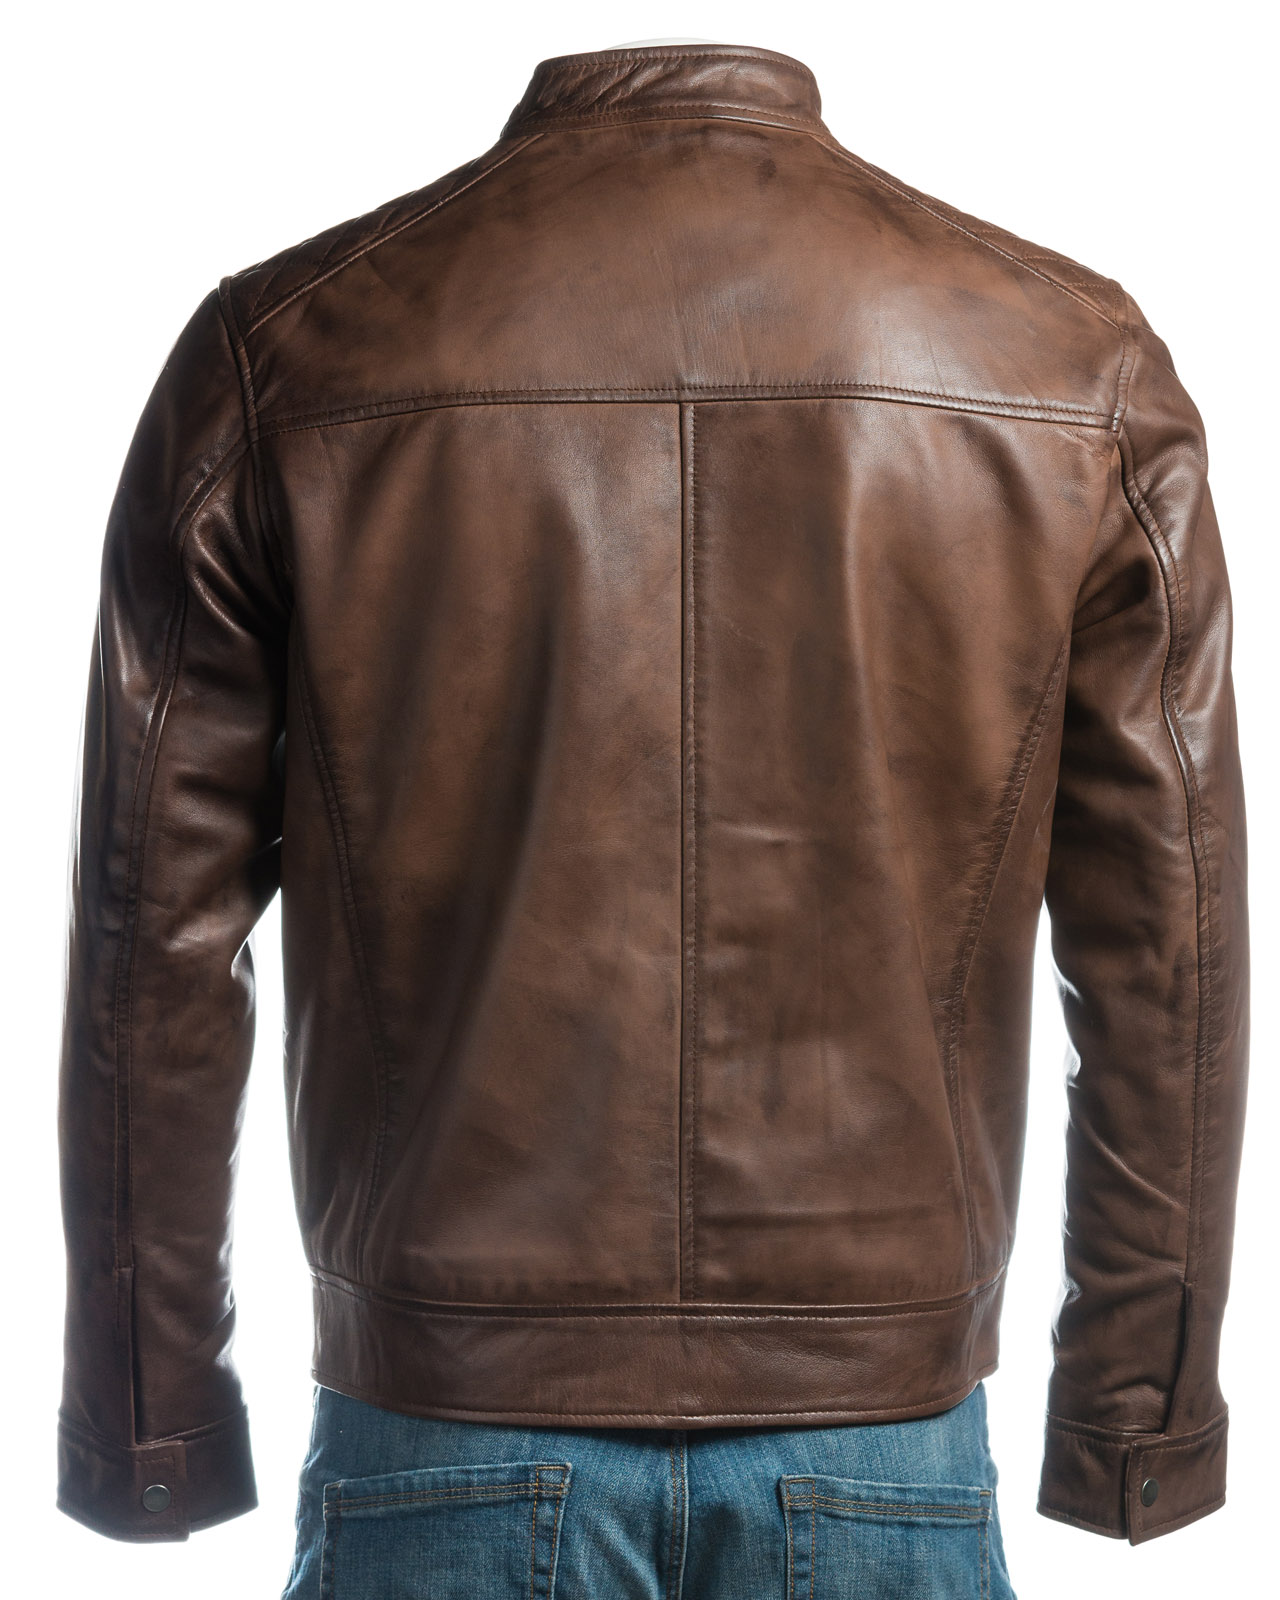 Men's Brown Slim Fit Racer Style Leather Jacket | Saffiano Leather